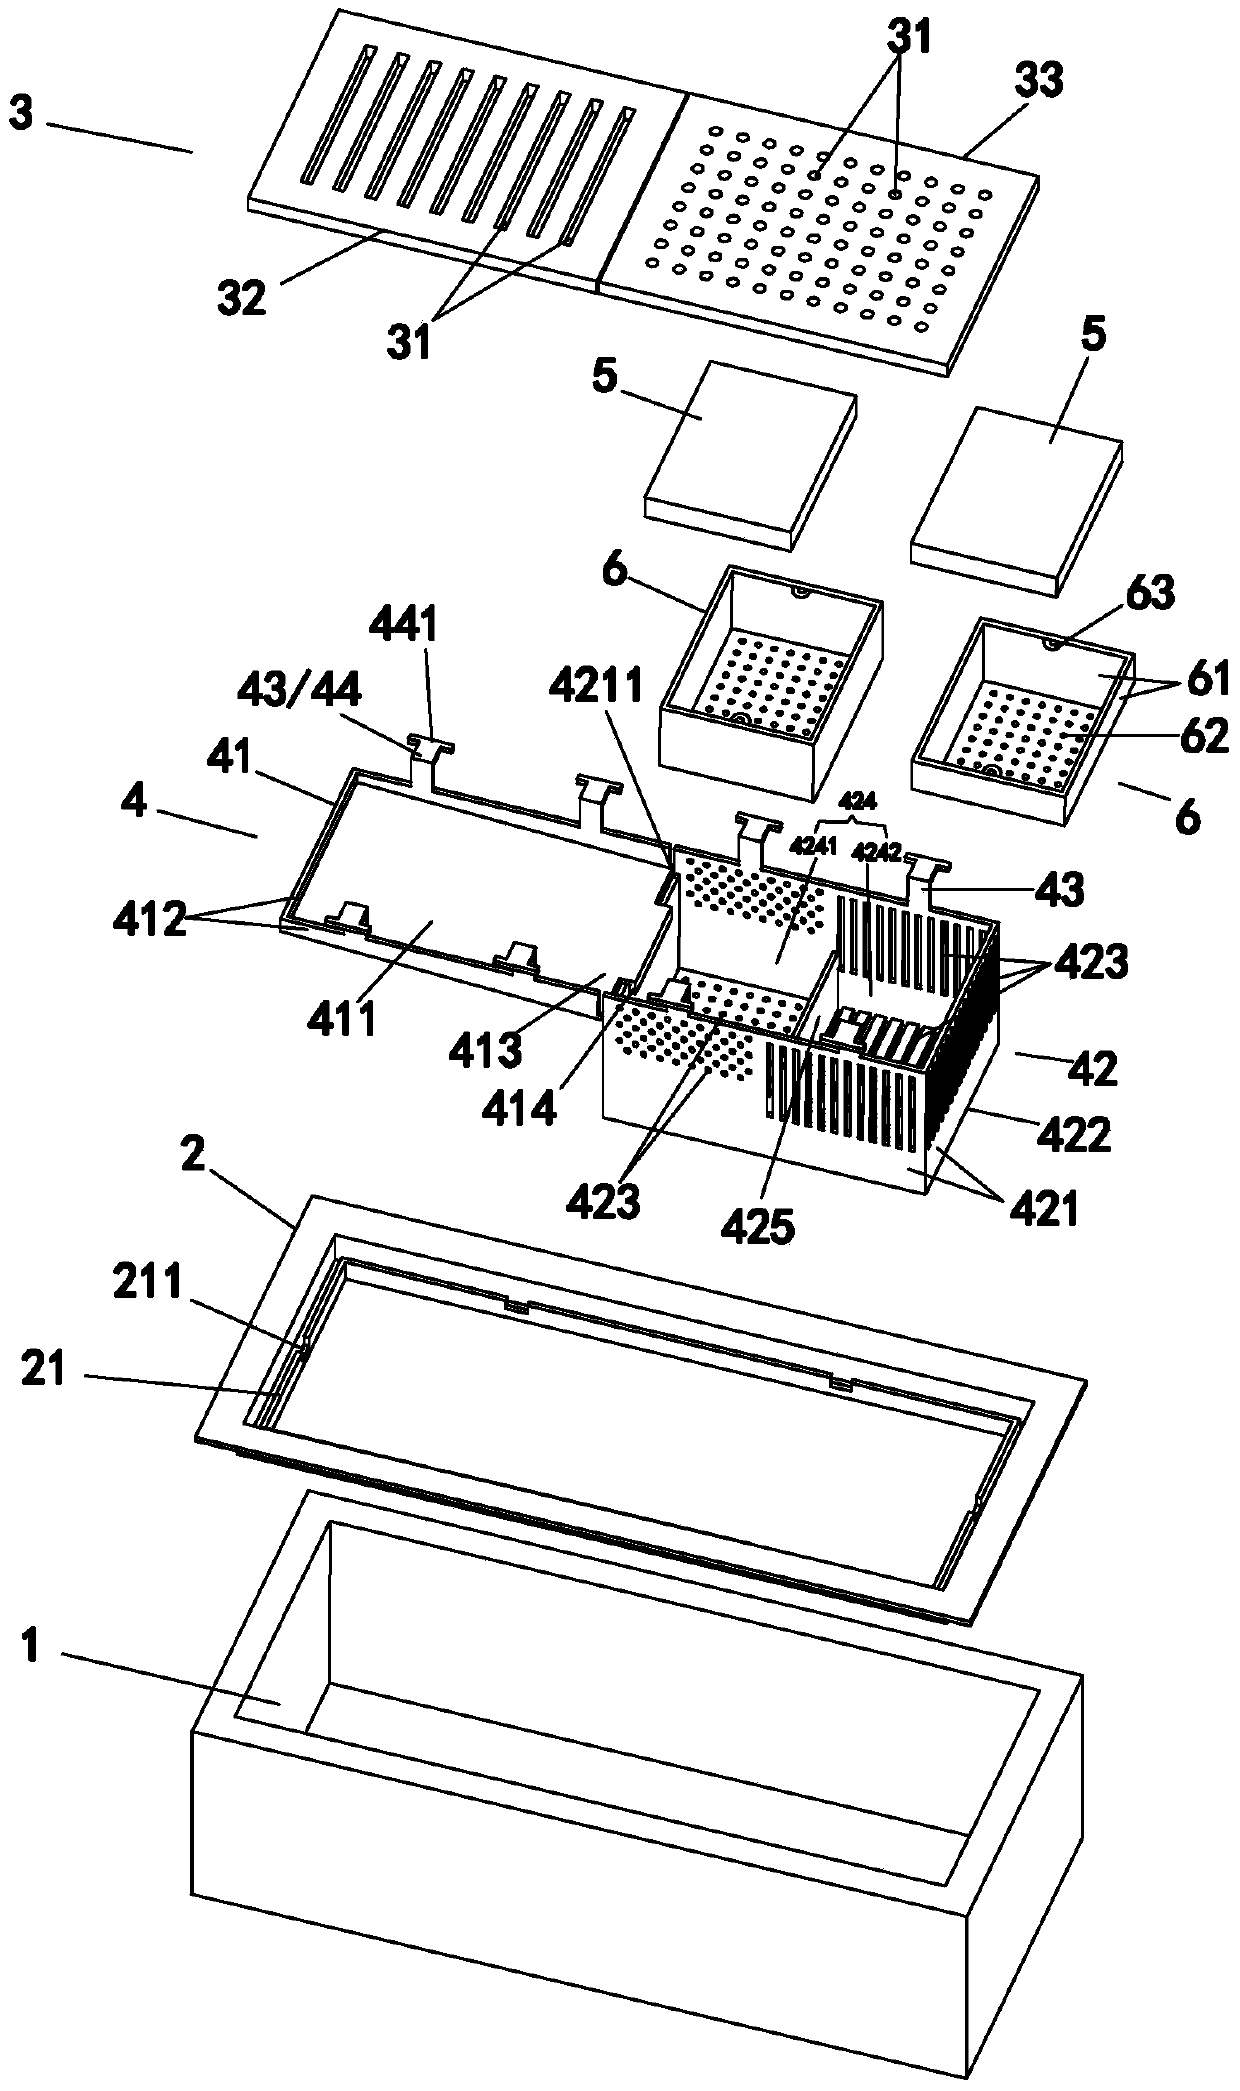 A filter device for a rainwater outlet garbage filter circulation system